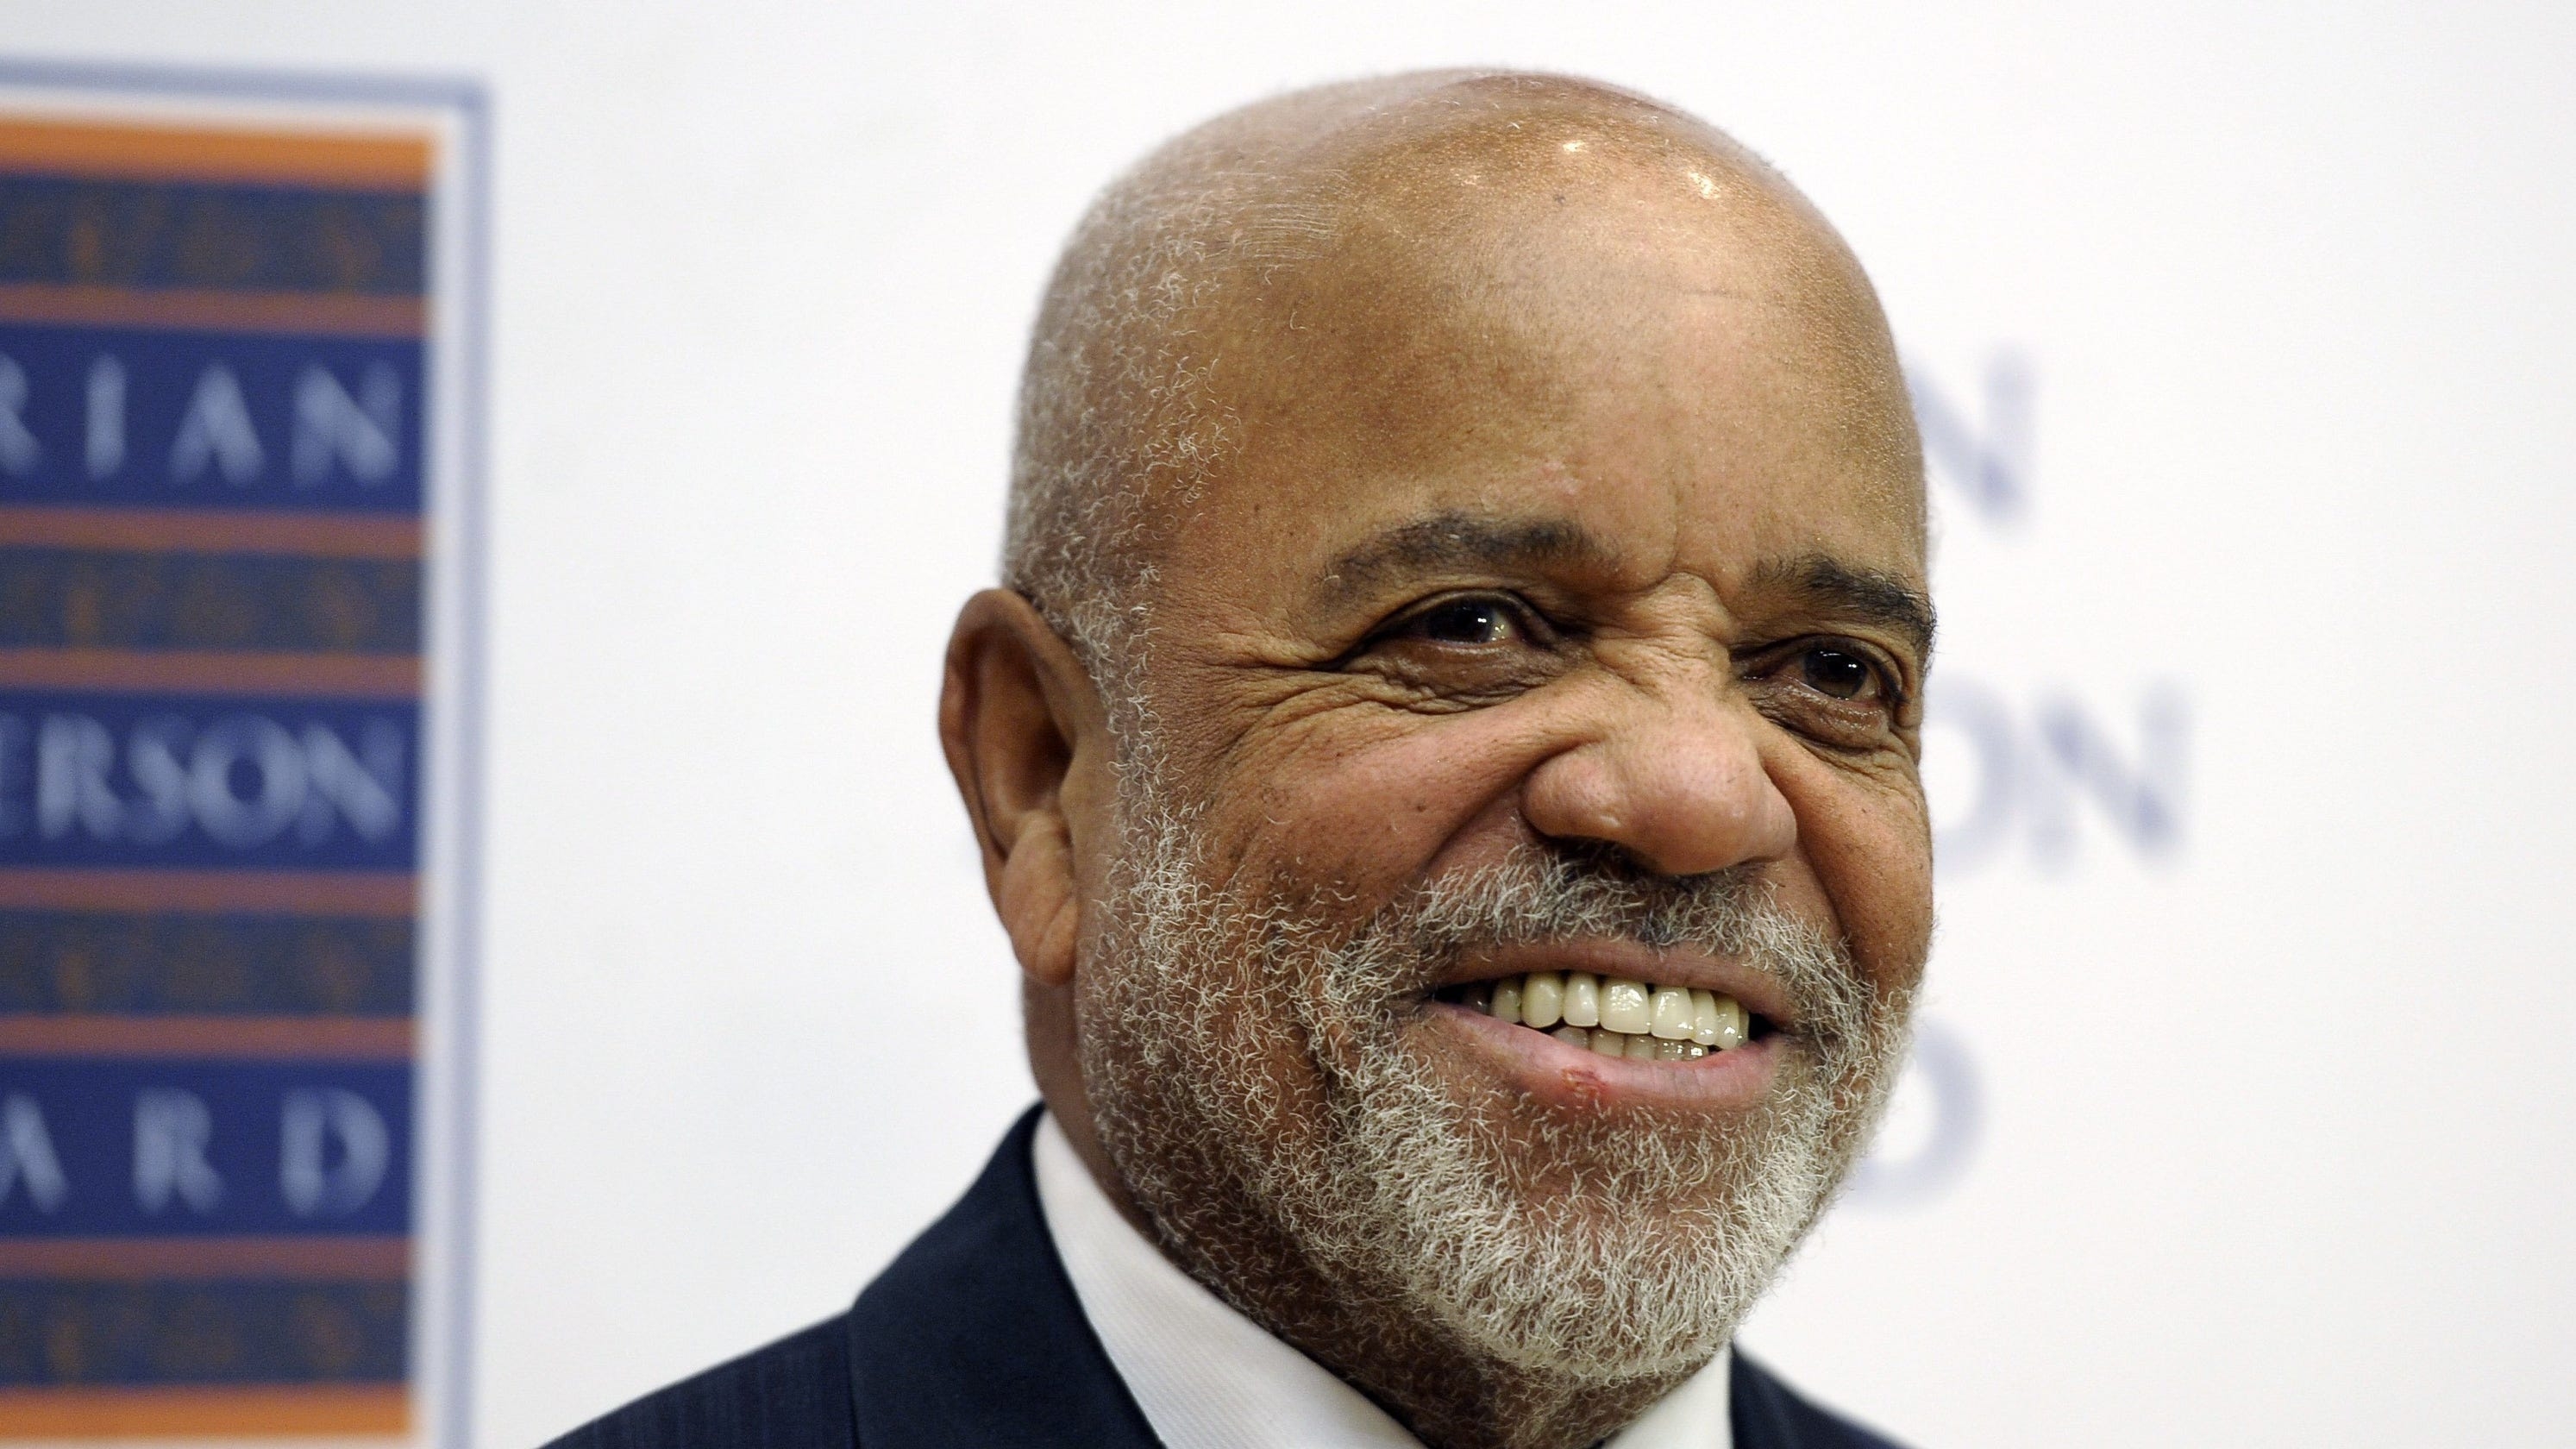 Berry Gordy reinvests in Detroit, donates $4 million to Motown Museum